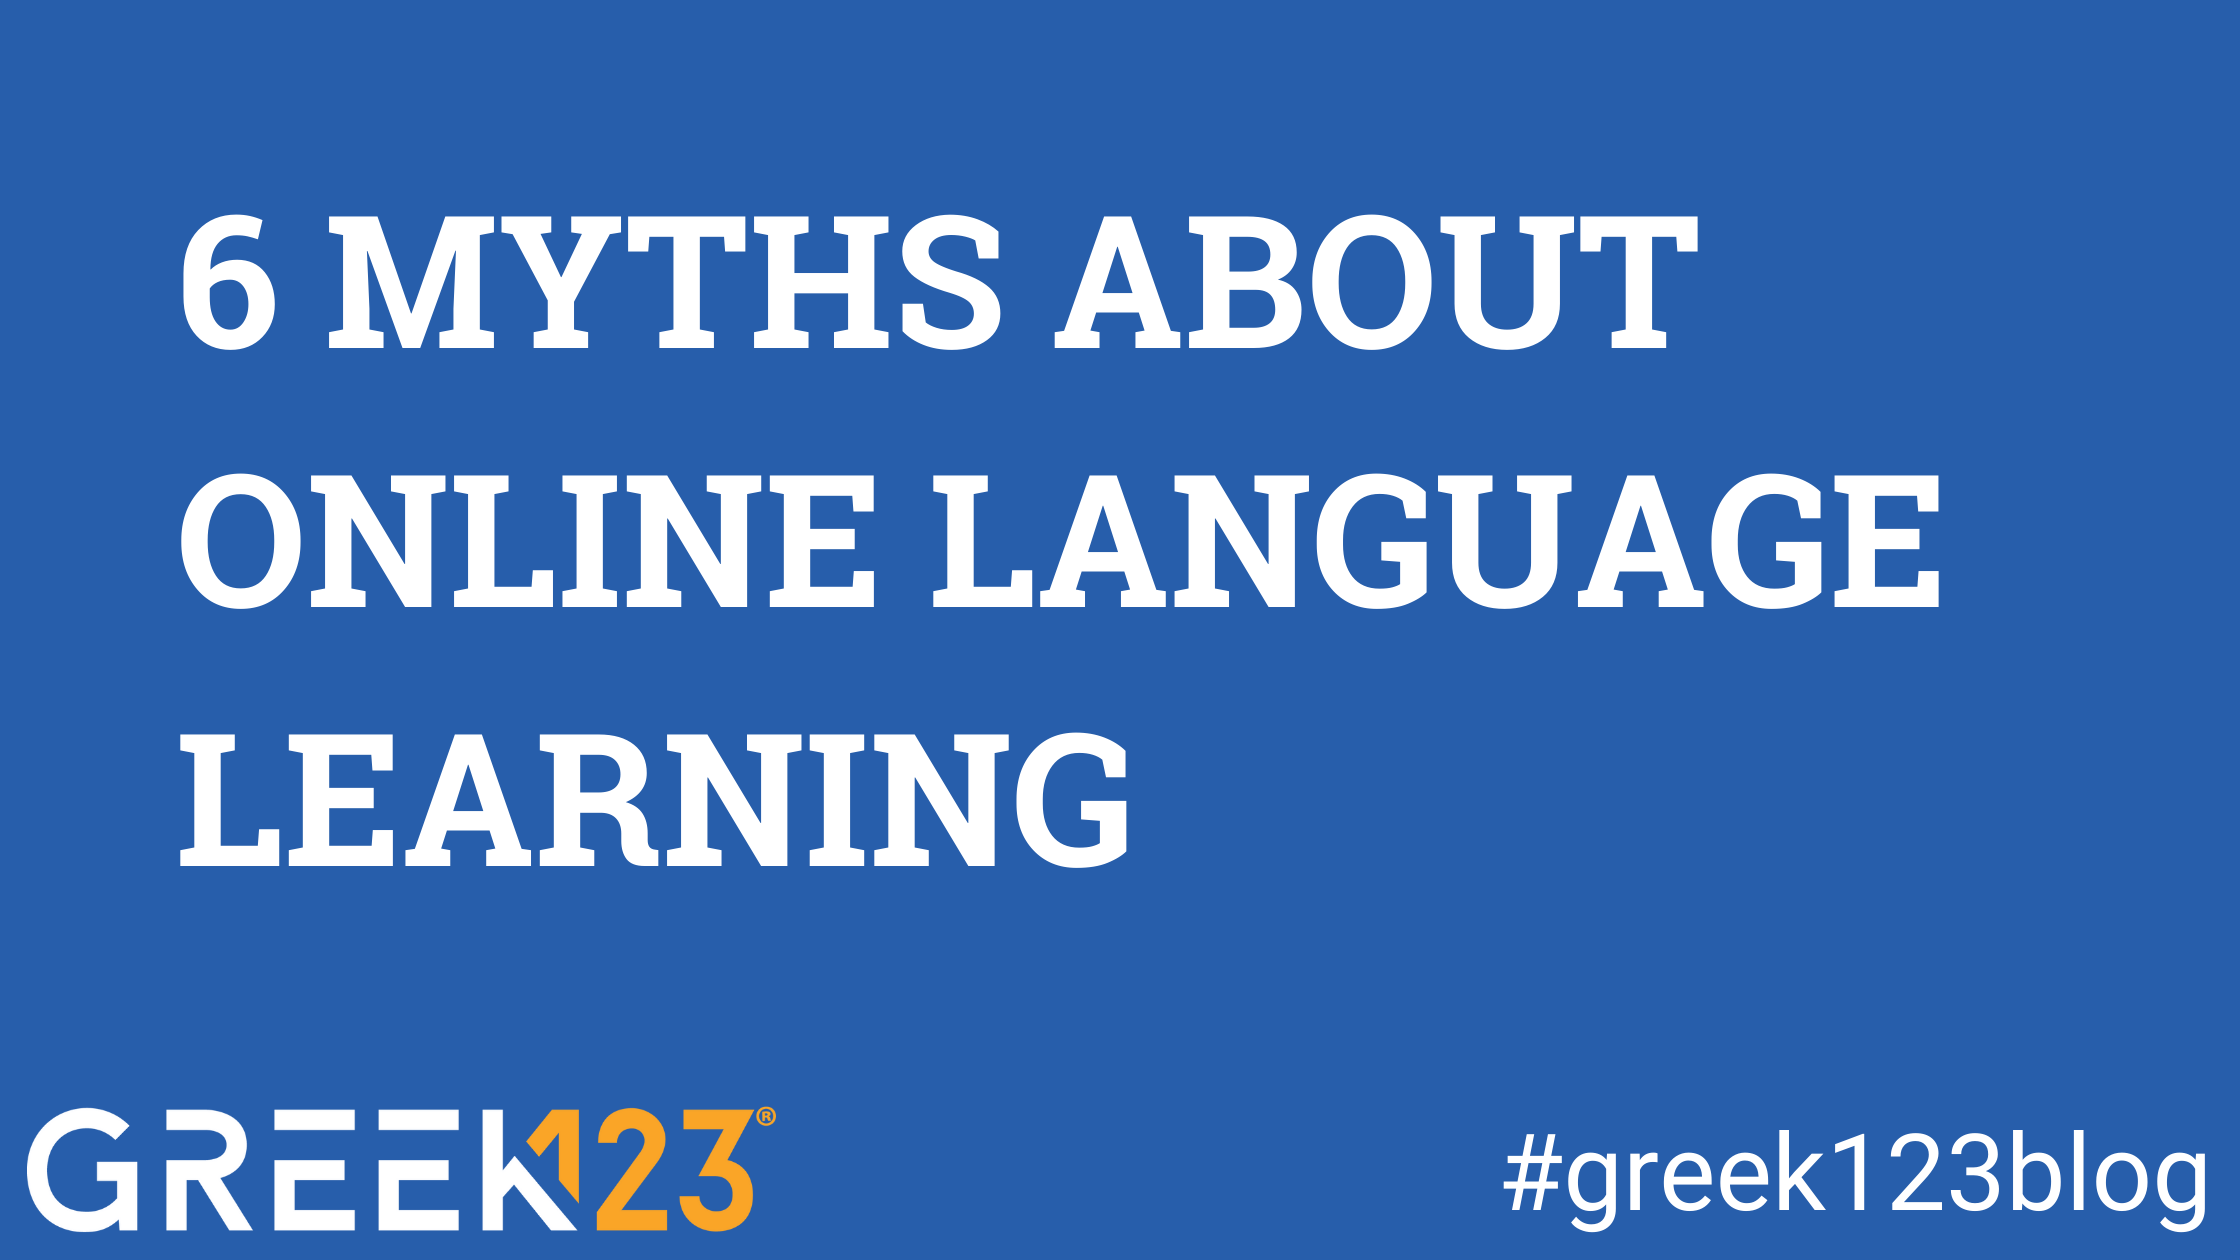 6 Myths about Online Language Learning